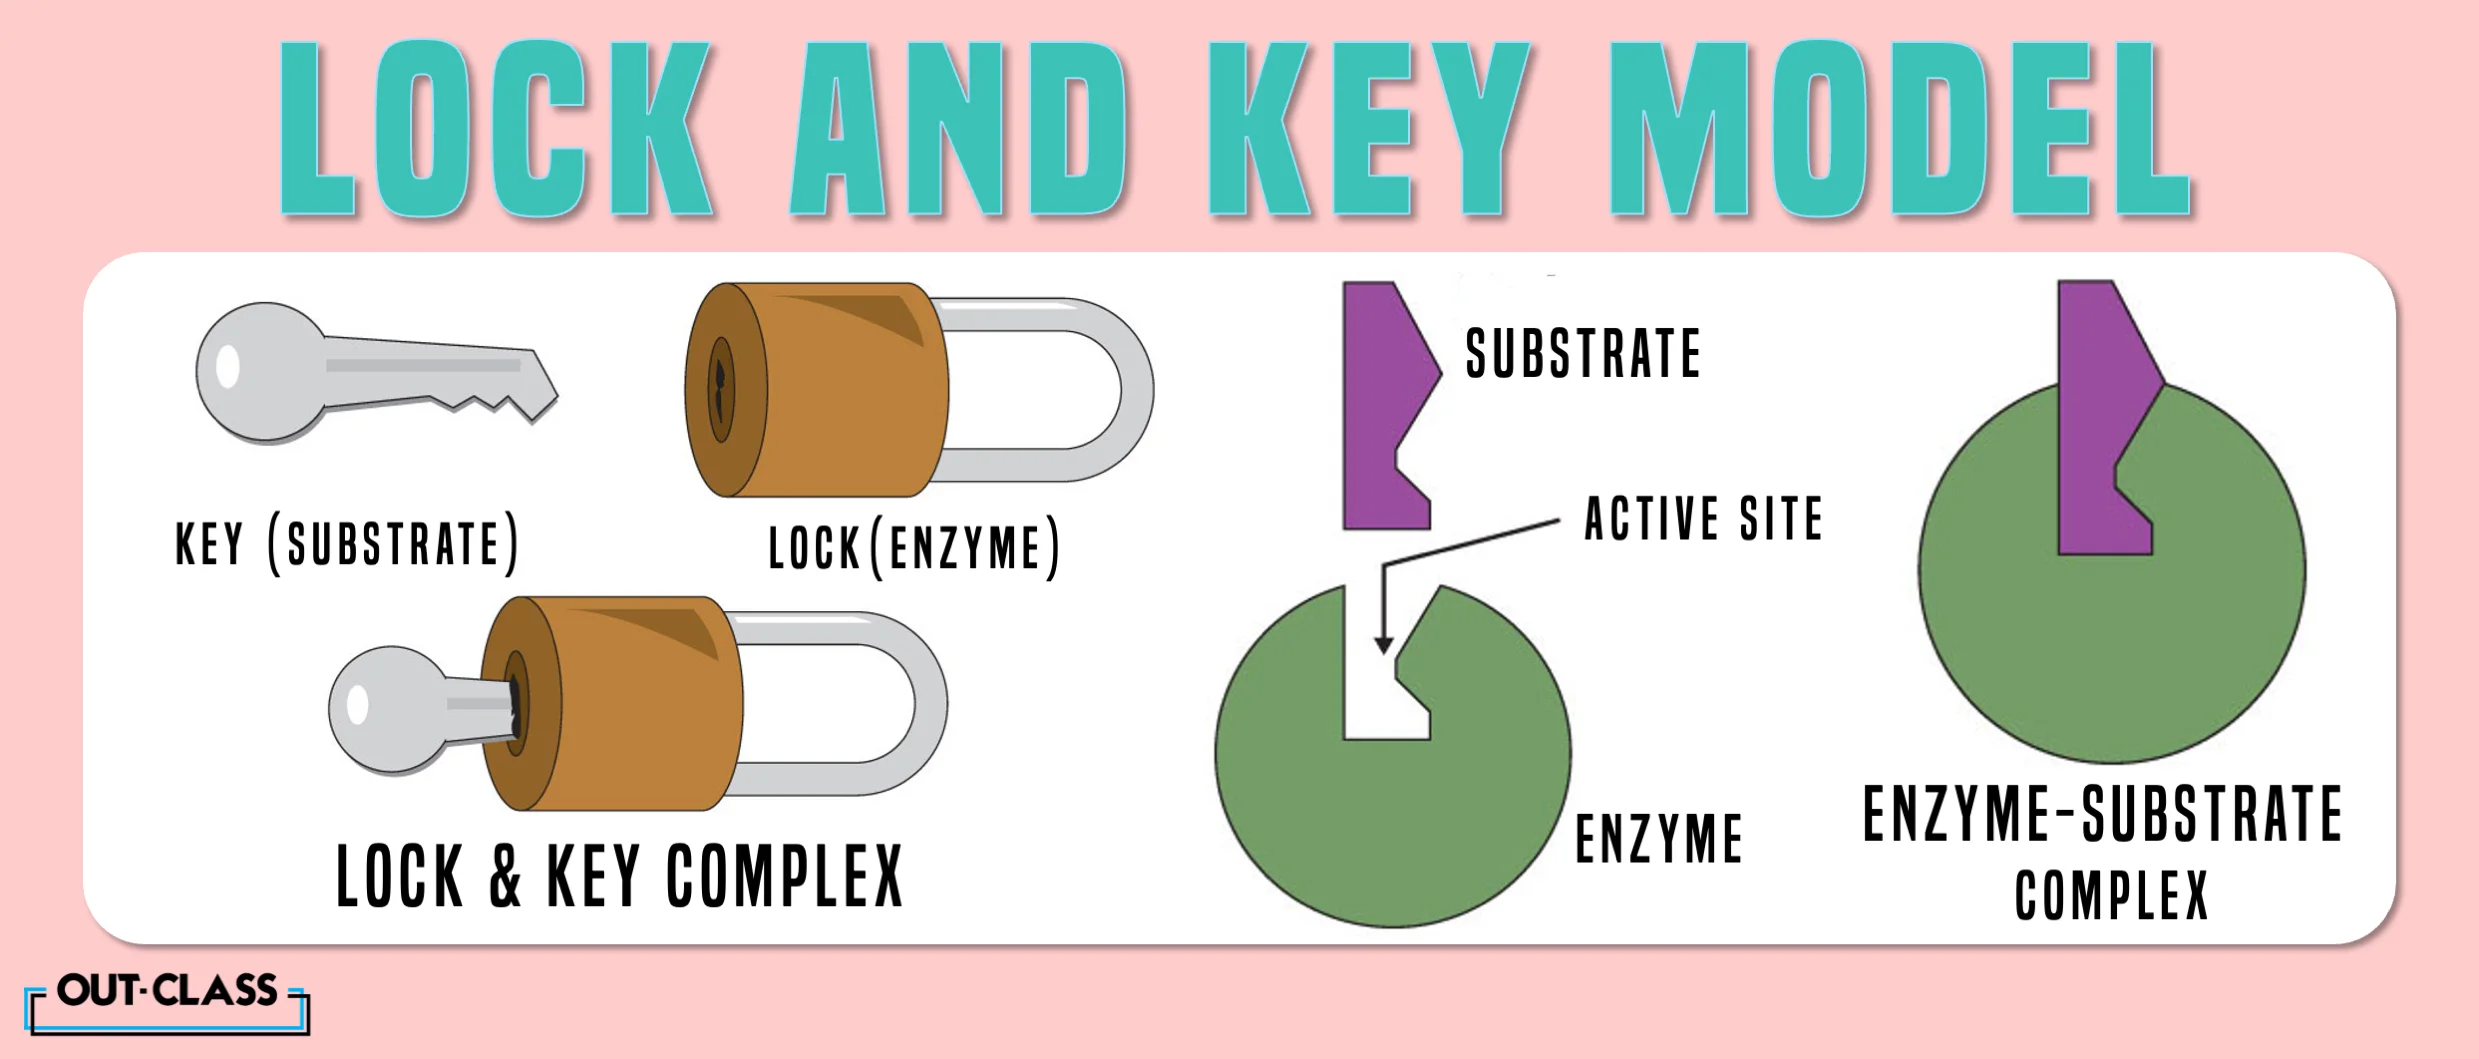 This shows the lock and key model enzyme of the O Level Biology concept. 